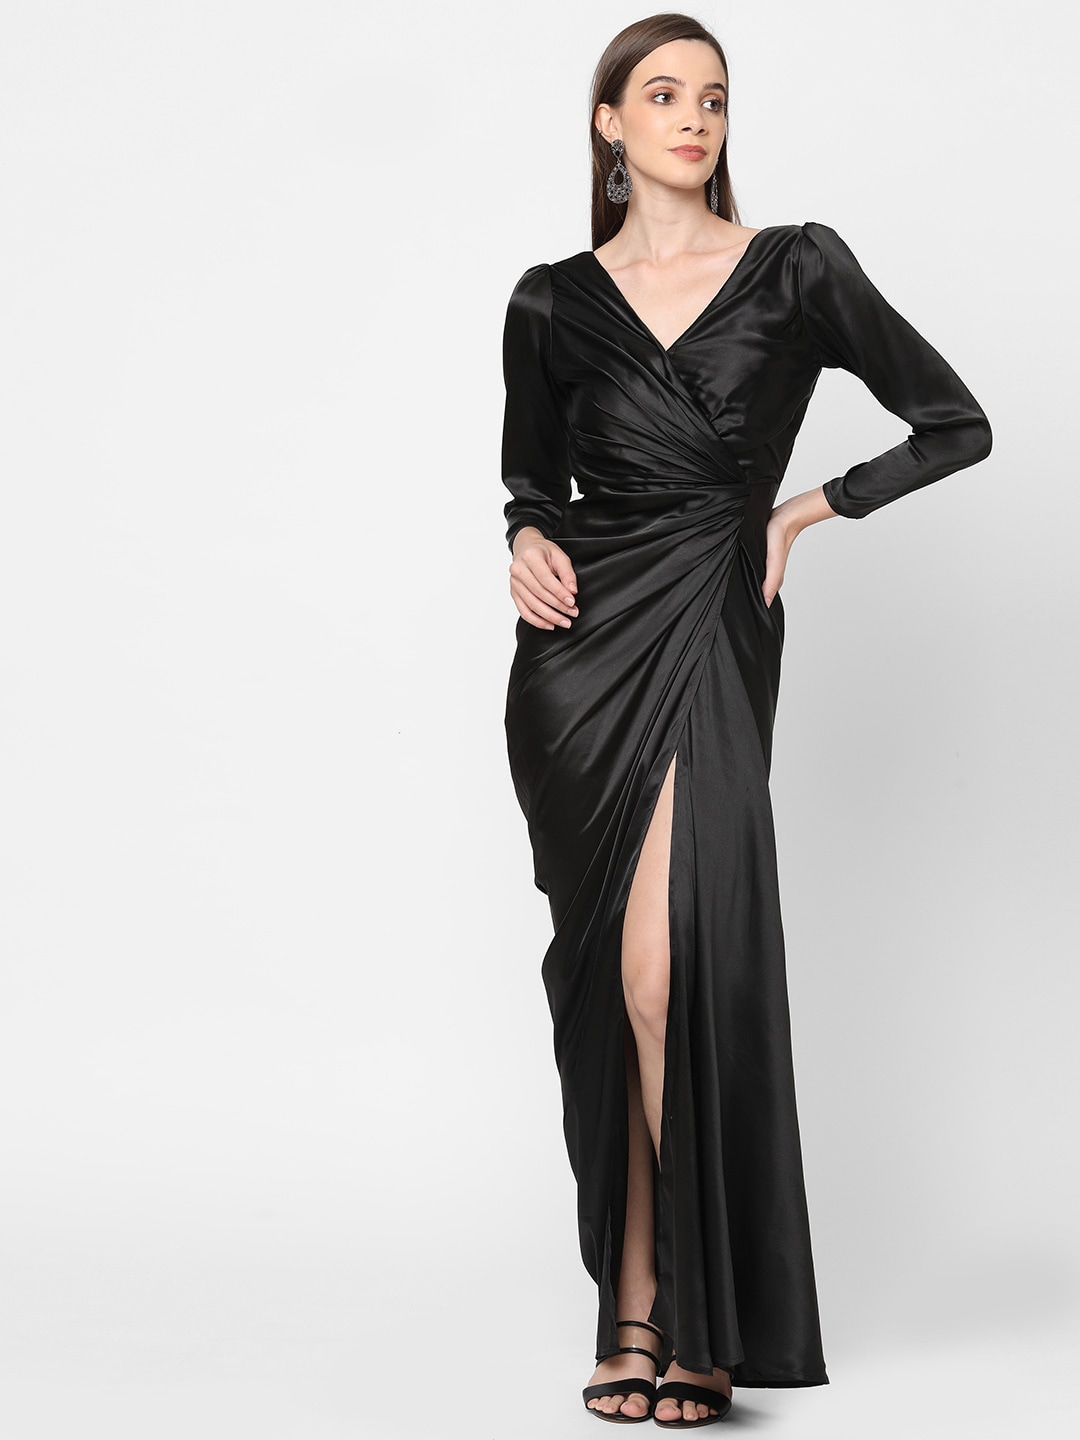 Black satin dress with slit- top 14 dresses from Myntra to buy now